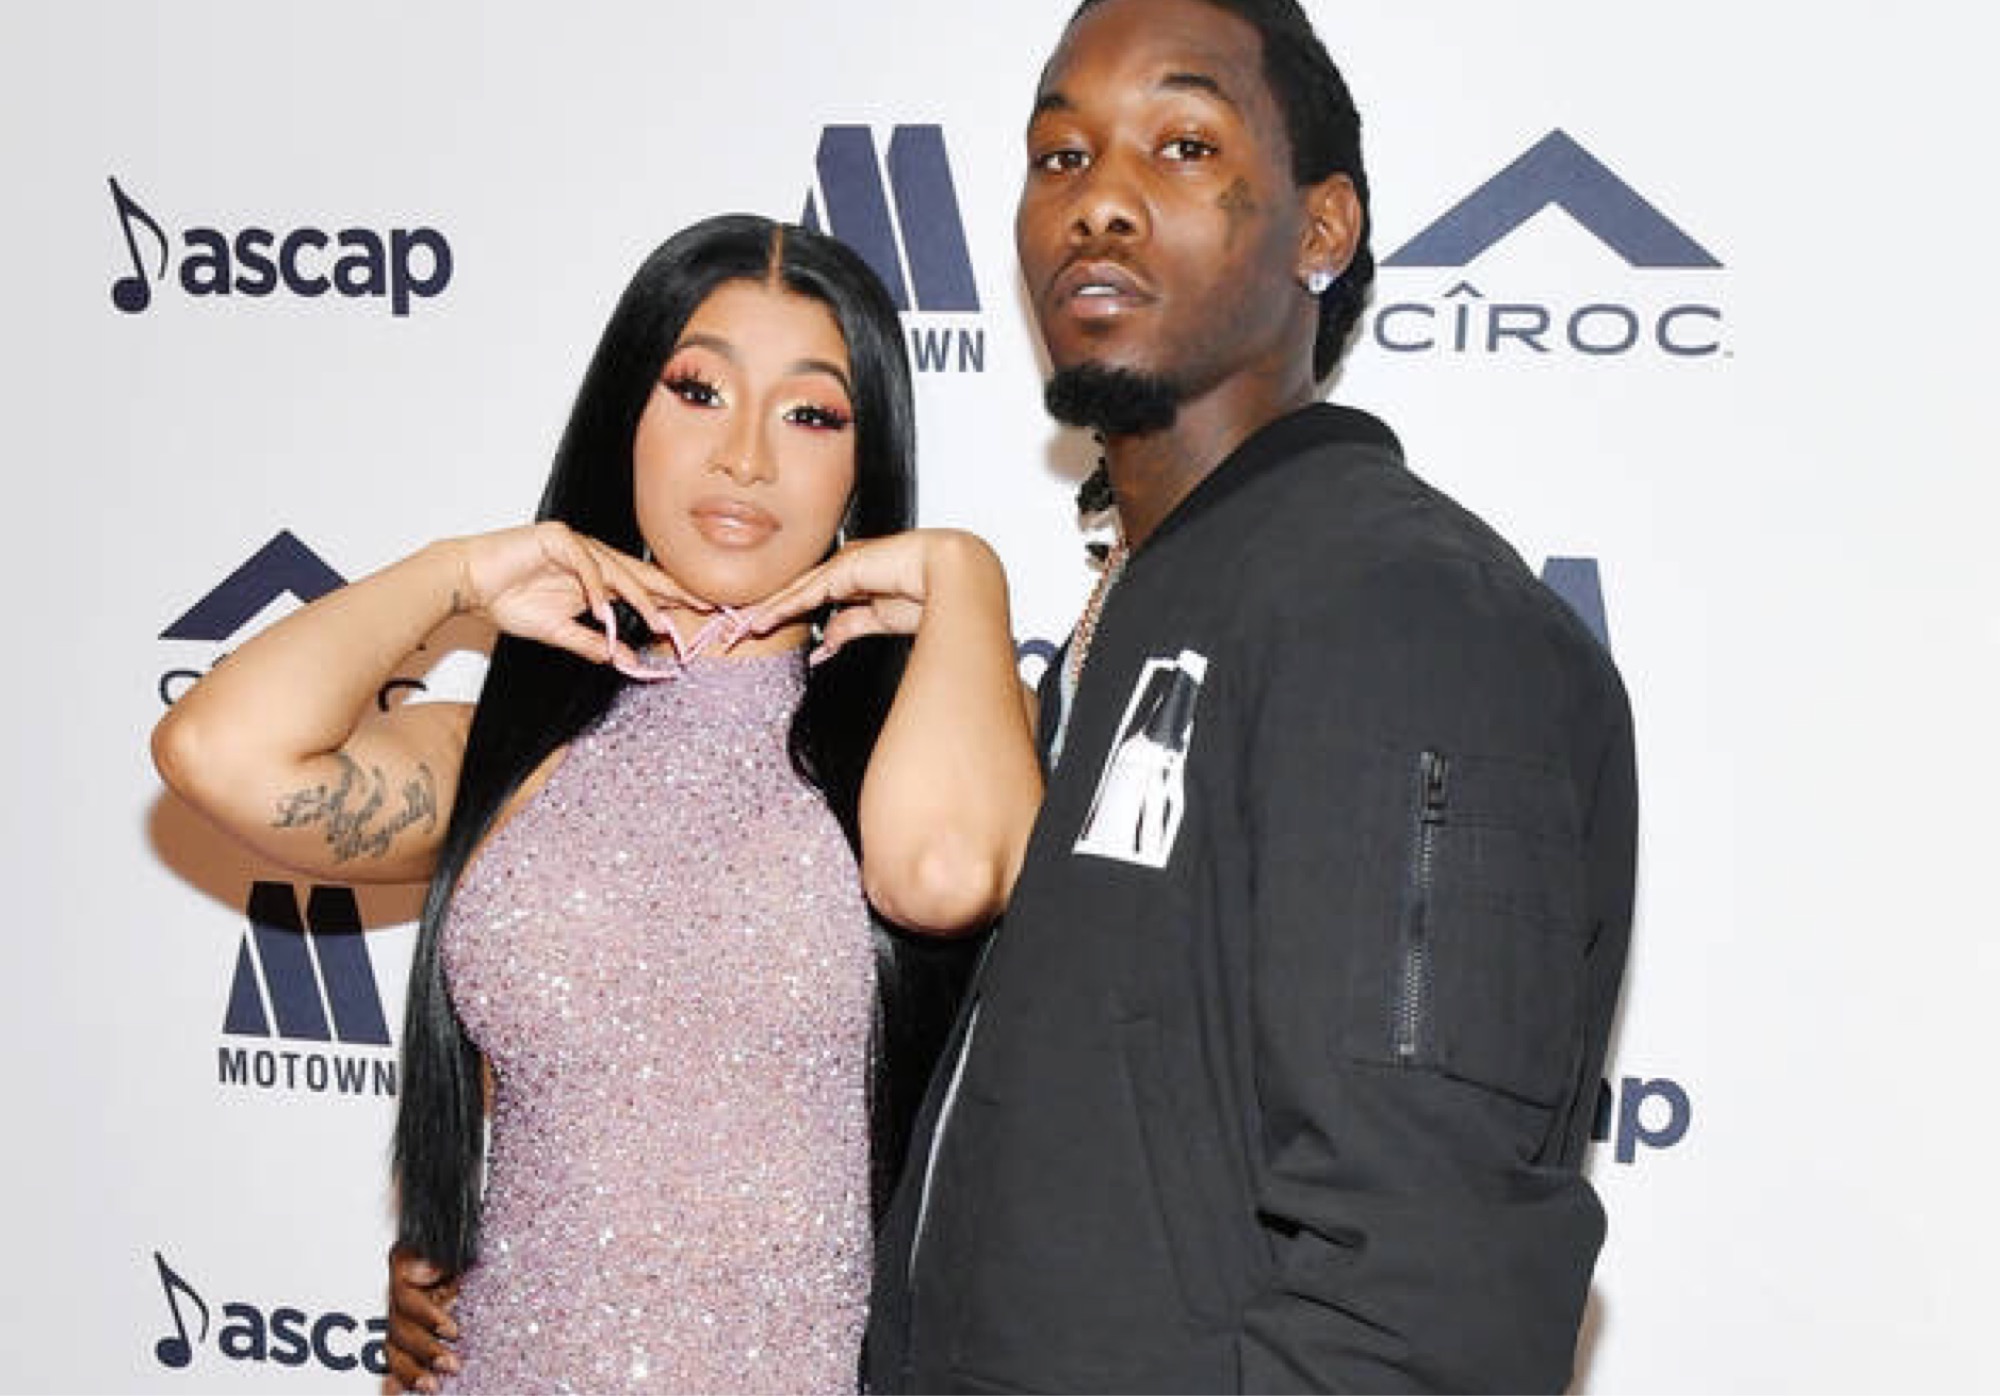 Offset Shares Video Of Cardi B Cleaning; Calls Her Out For 'Lying' In Her WAP Song